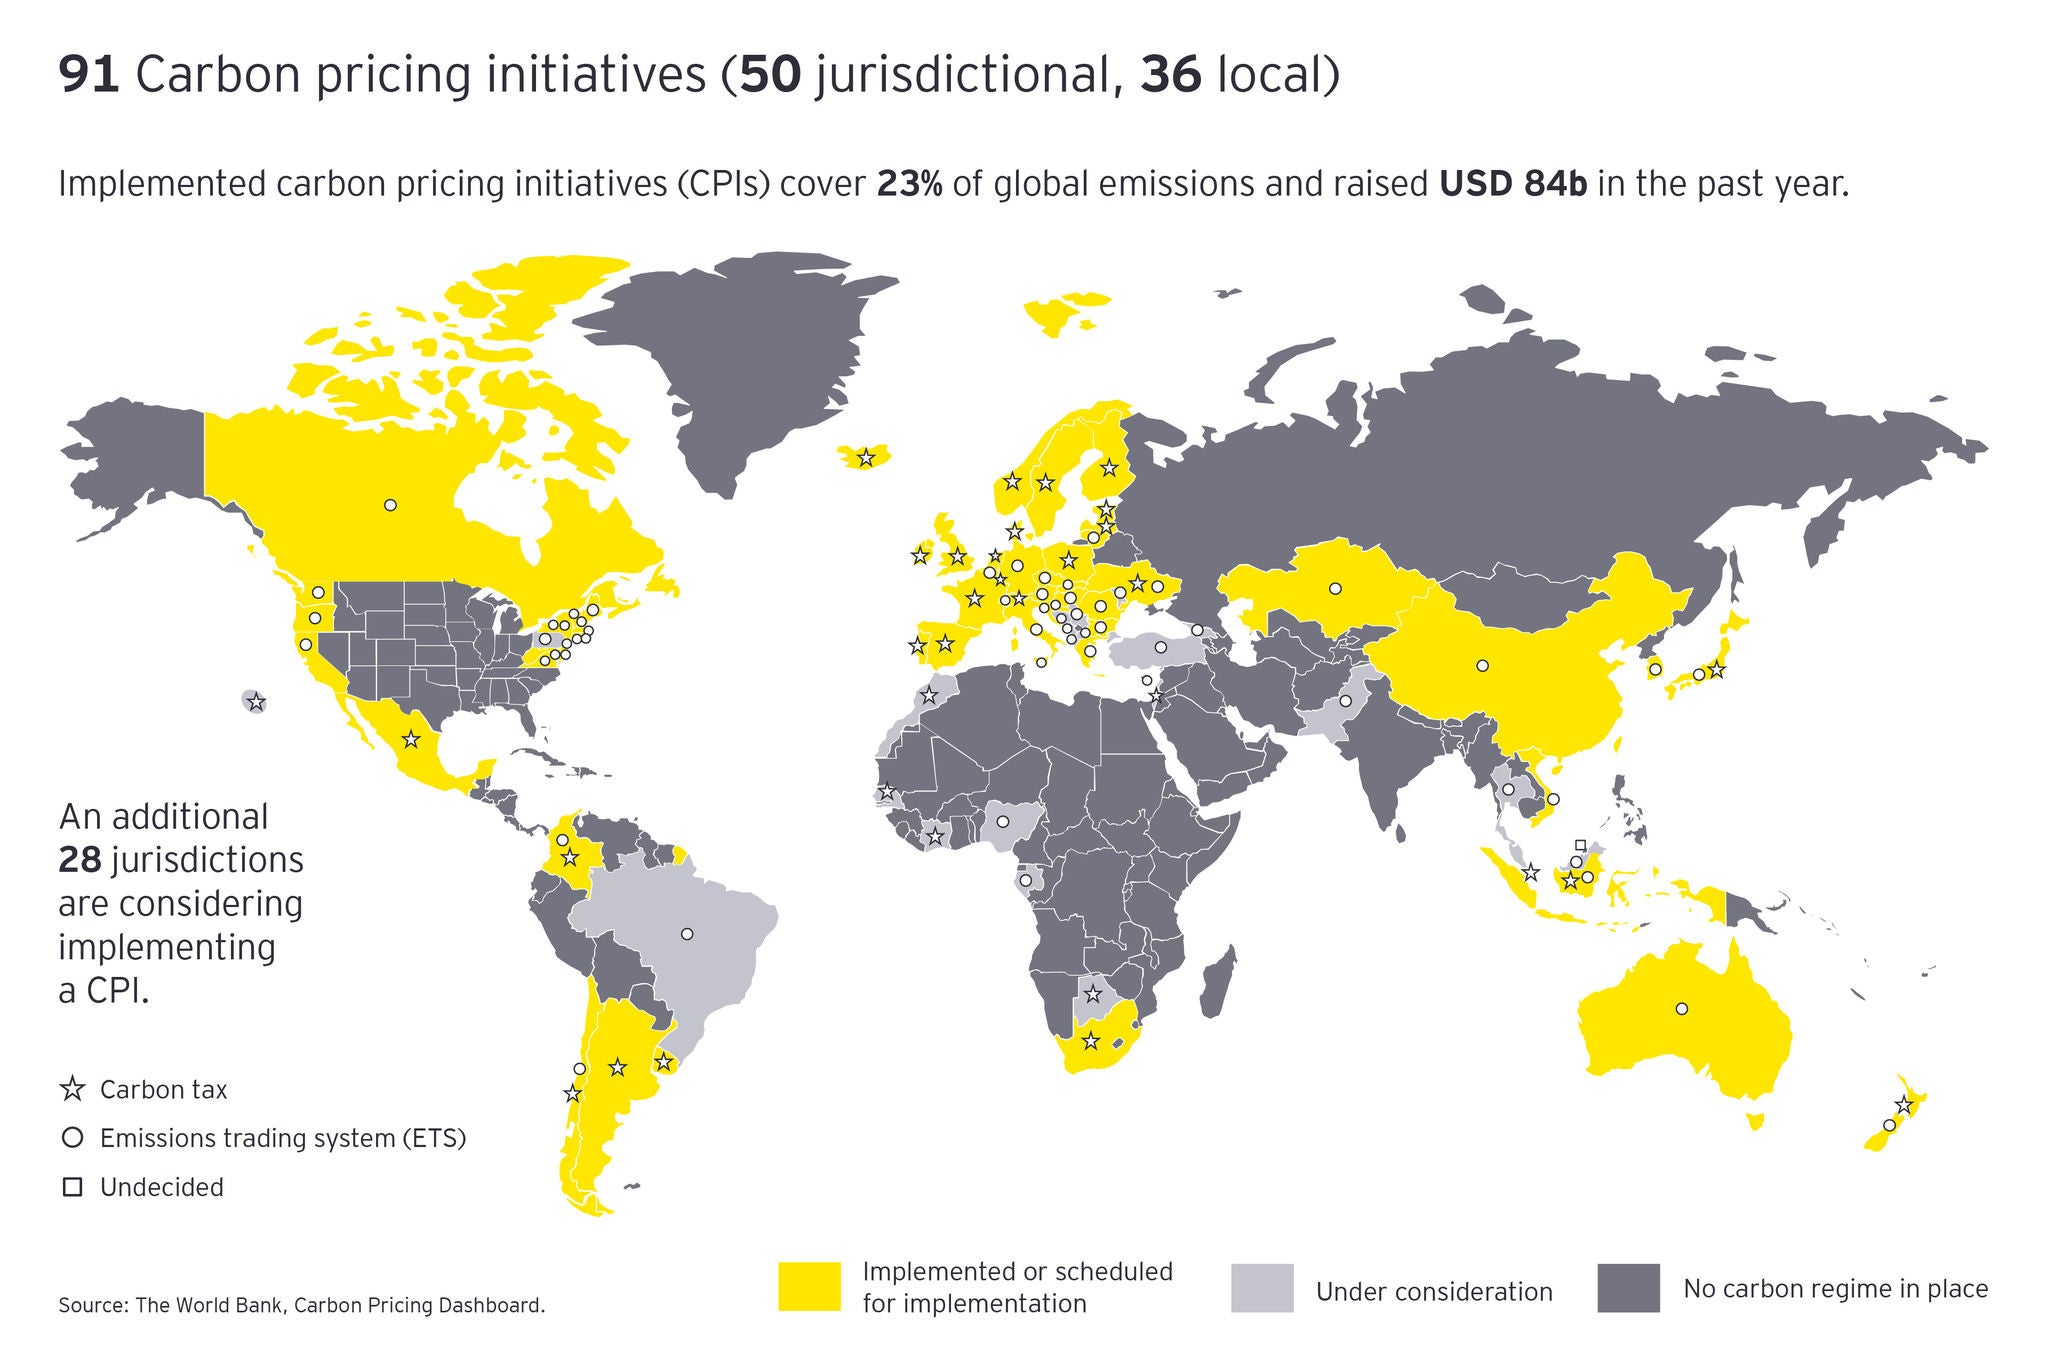 ey-91-carbon-pricing-initiatives